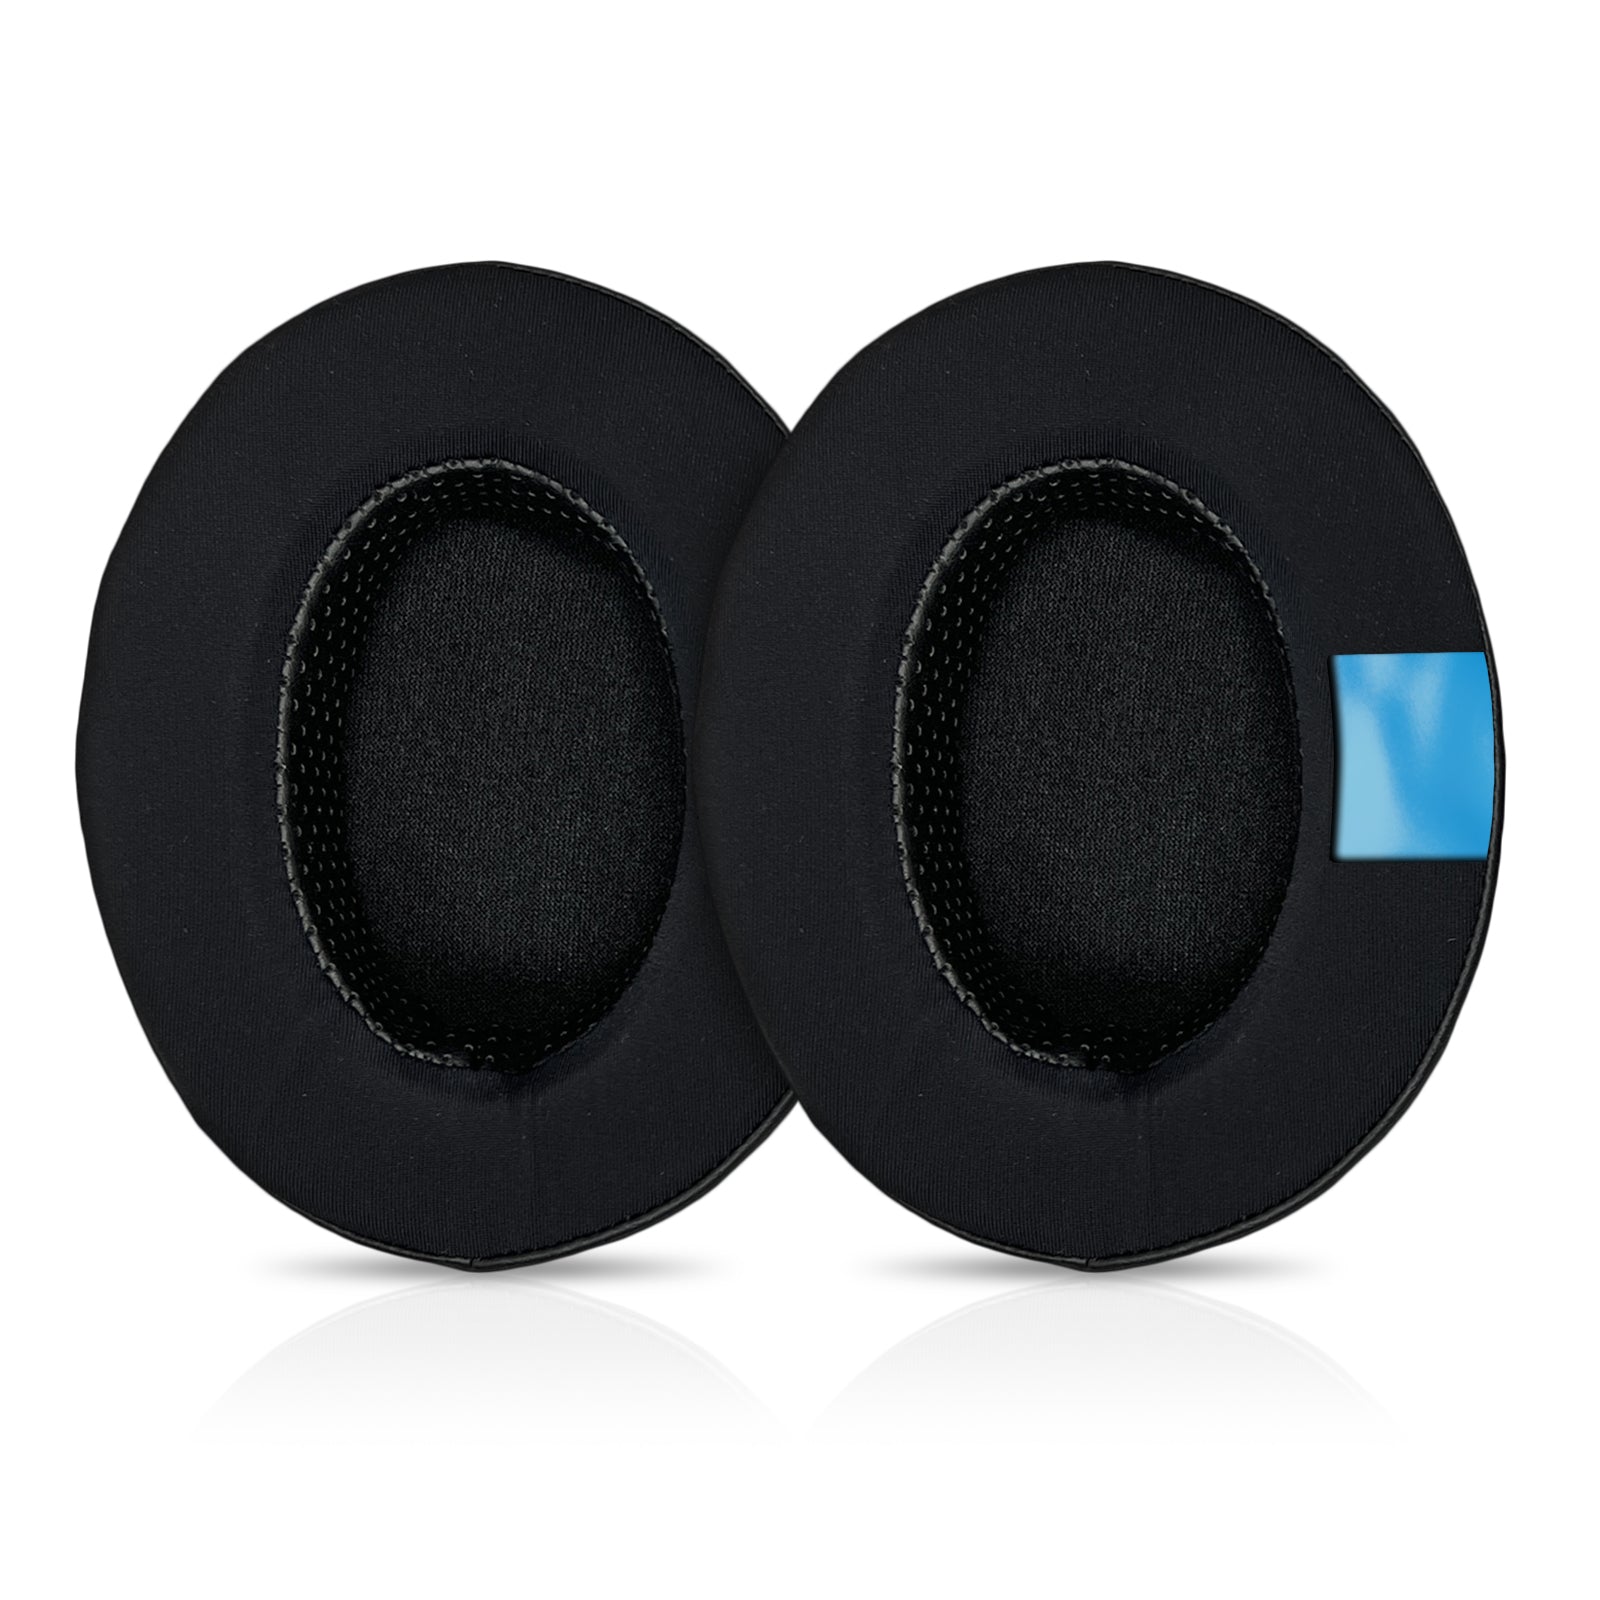 CentralSound Premium XL Replacement Ear Pad Cushions for Logitech Headsets G35 G332 G533 G633 G933 G935 G-PRO G433 G Pro G Pro Max - CentralSound